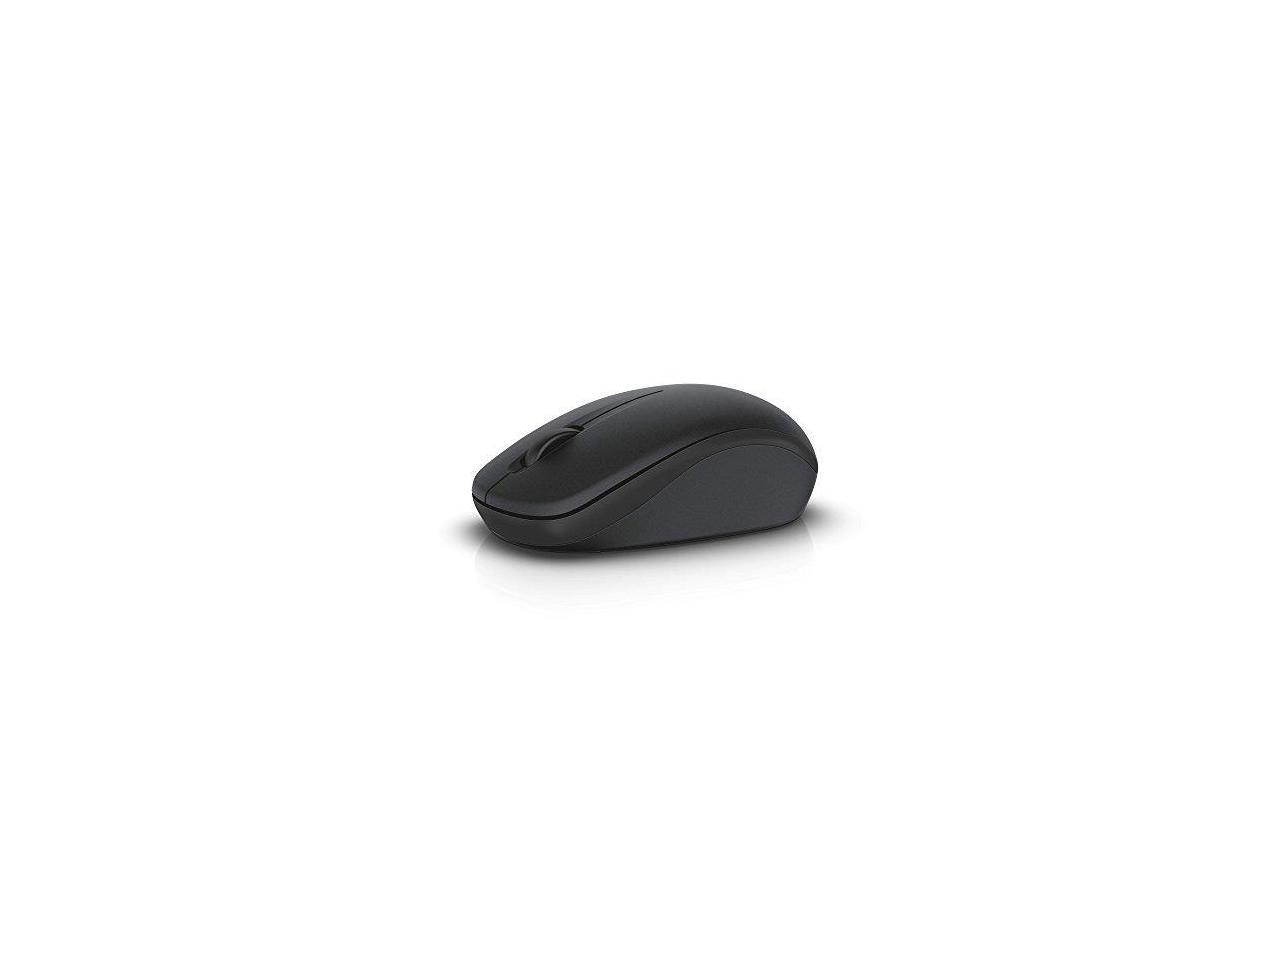 DELL WM126 NNP0G Black 3 Buttons 1 x Wheel USB RF Wireless Optical 1000 dpi Wireless Mouse - image 2 of 16